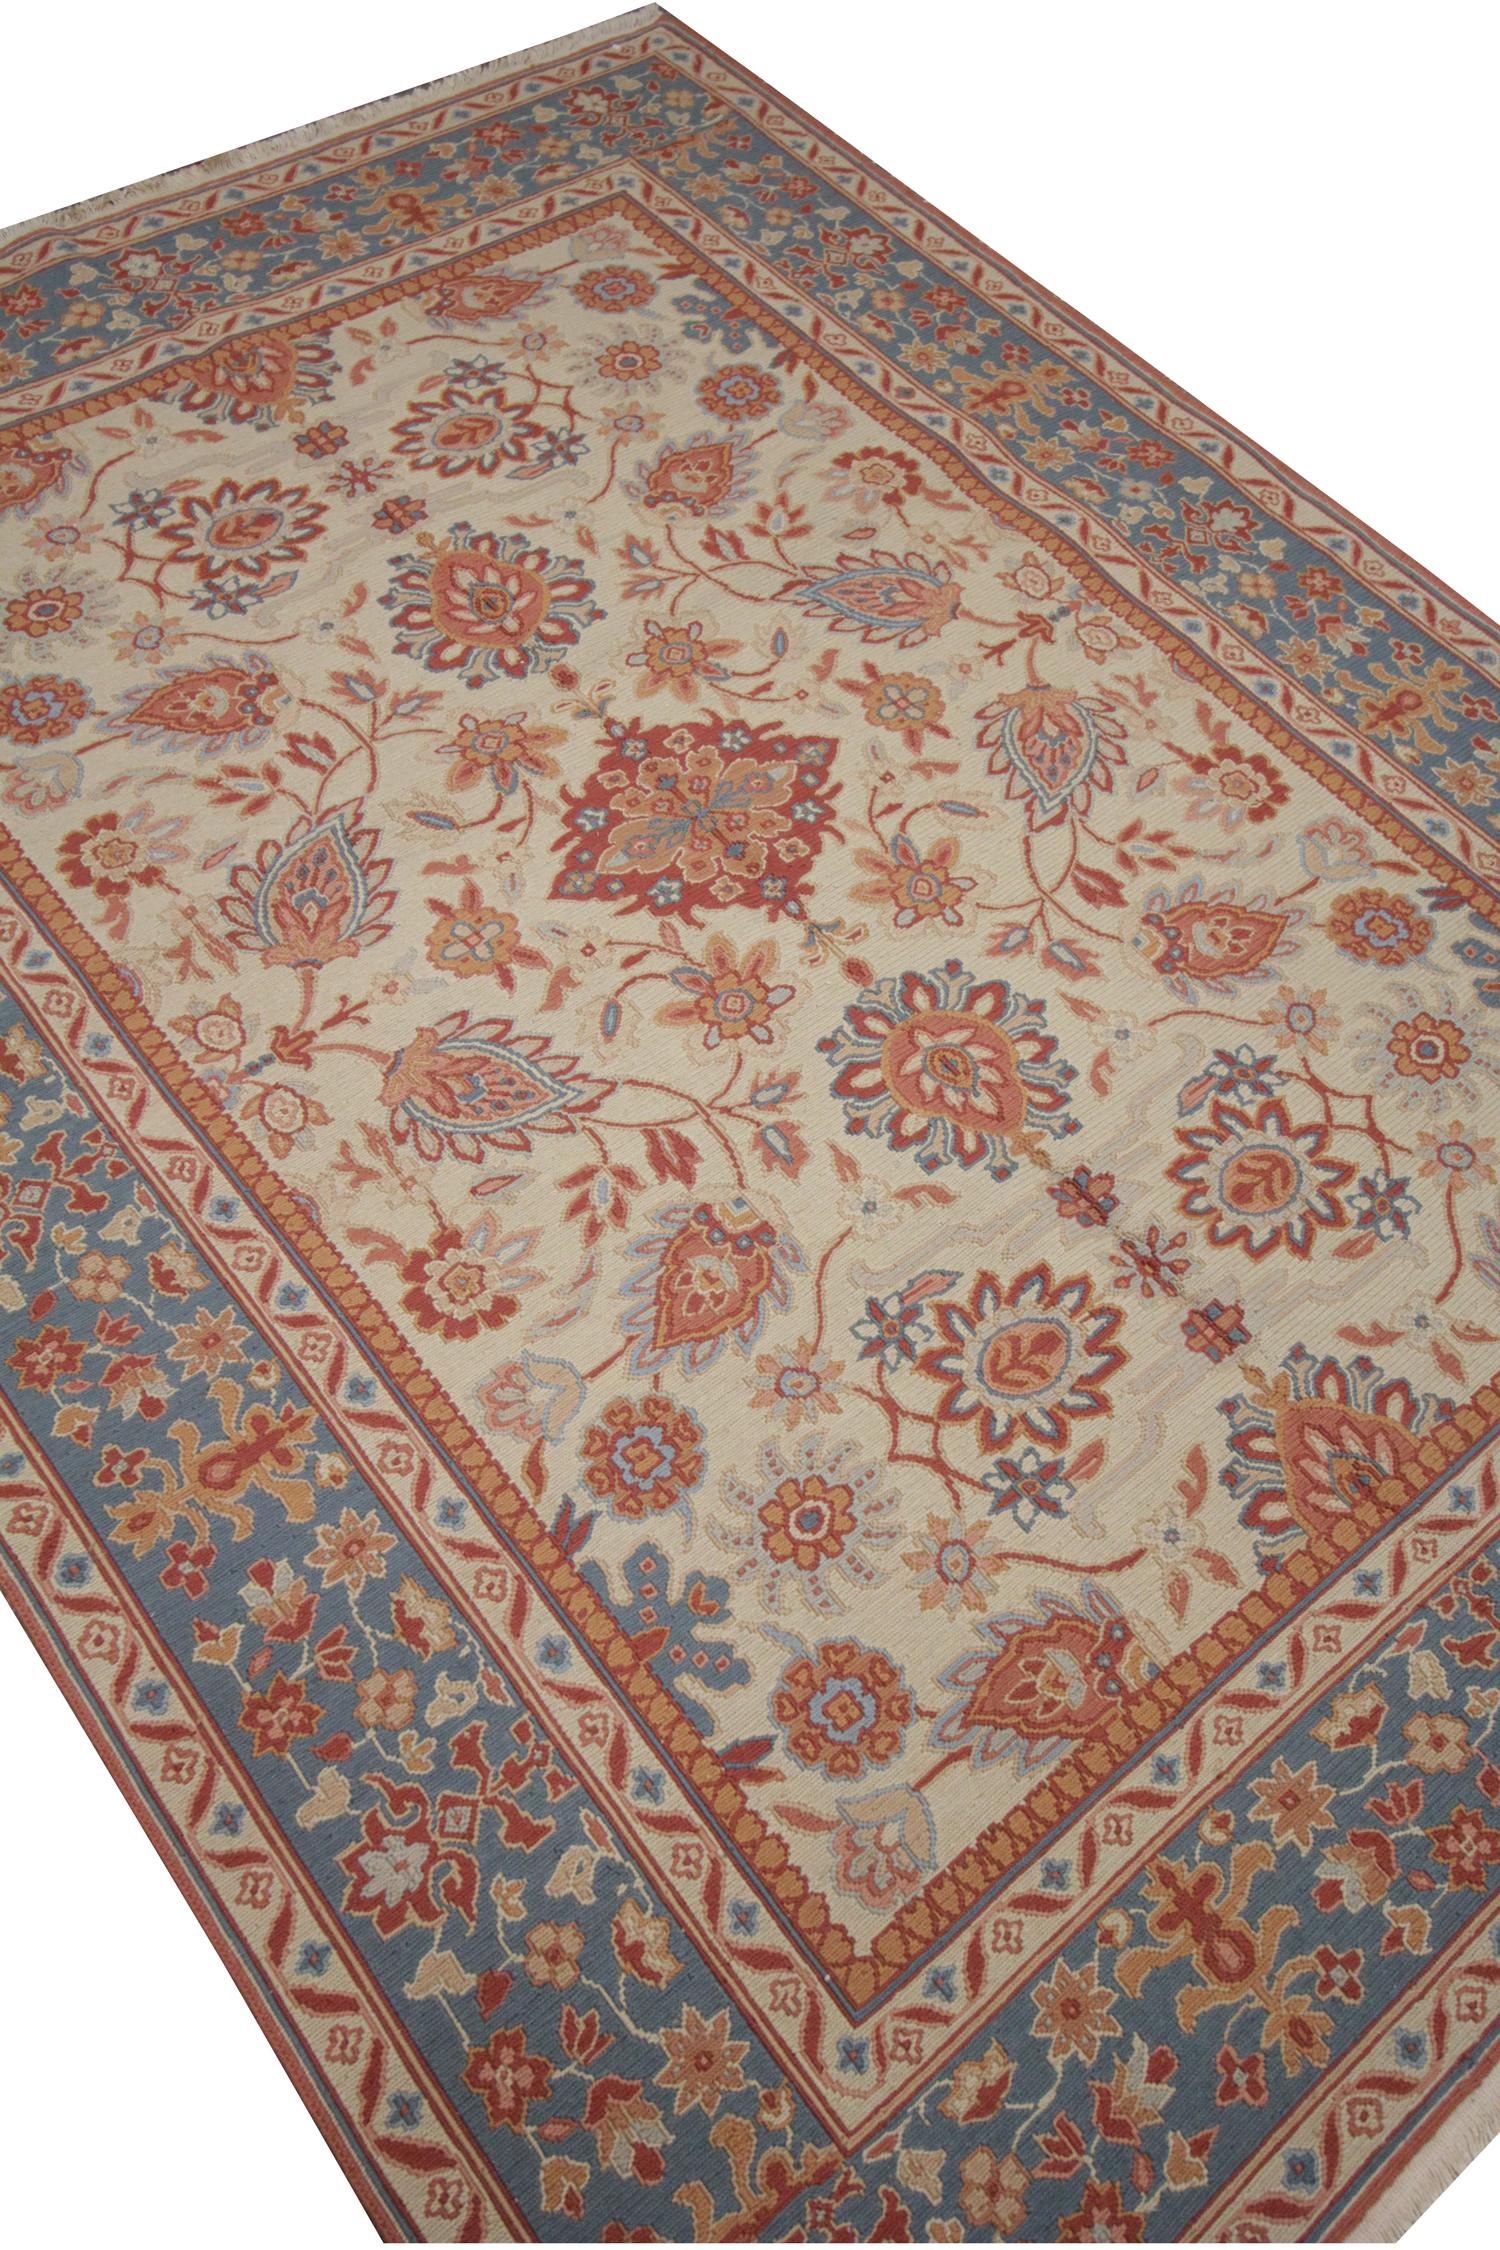 This elegant flat woven Soumak rug is a traditional piece woven by hand in the early 2000s in Afghanistan. This piece has never been used and is in excellent condition. The design has been woven with a subtle cream background with red, blue, and